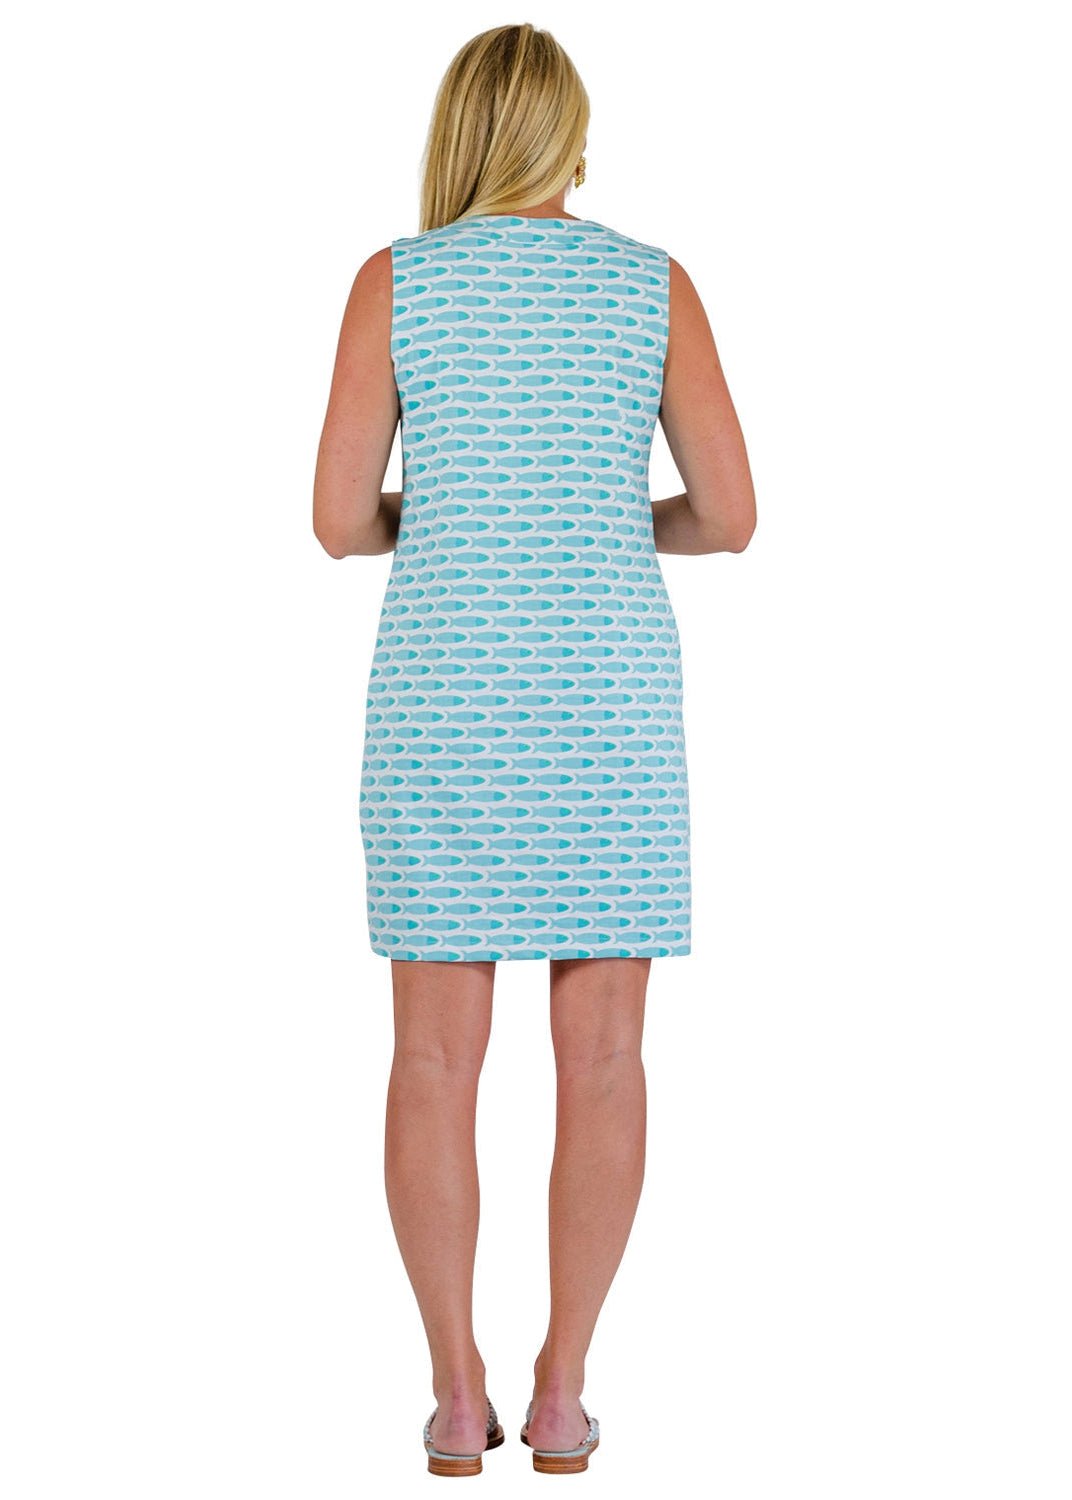 Sleeveless Dresses – Page 2 – sailor-sailor Clothing